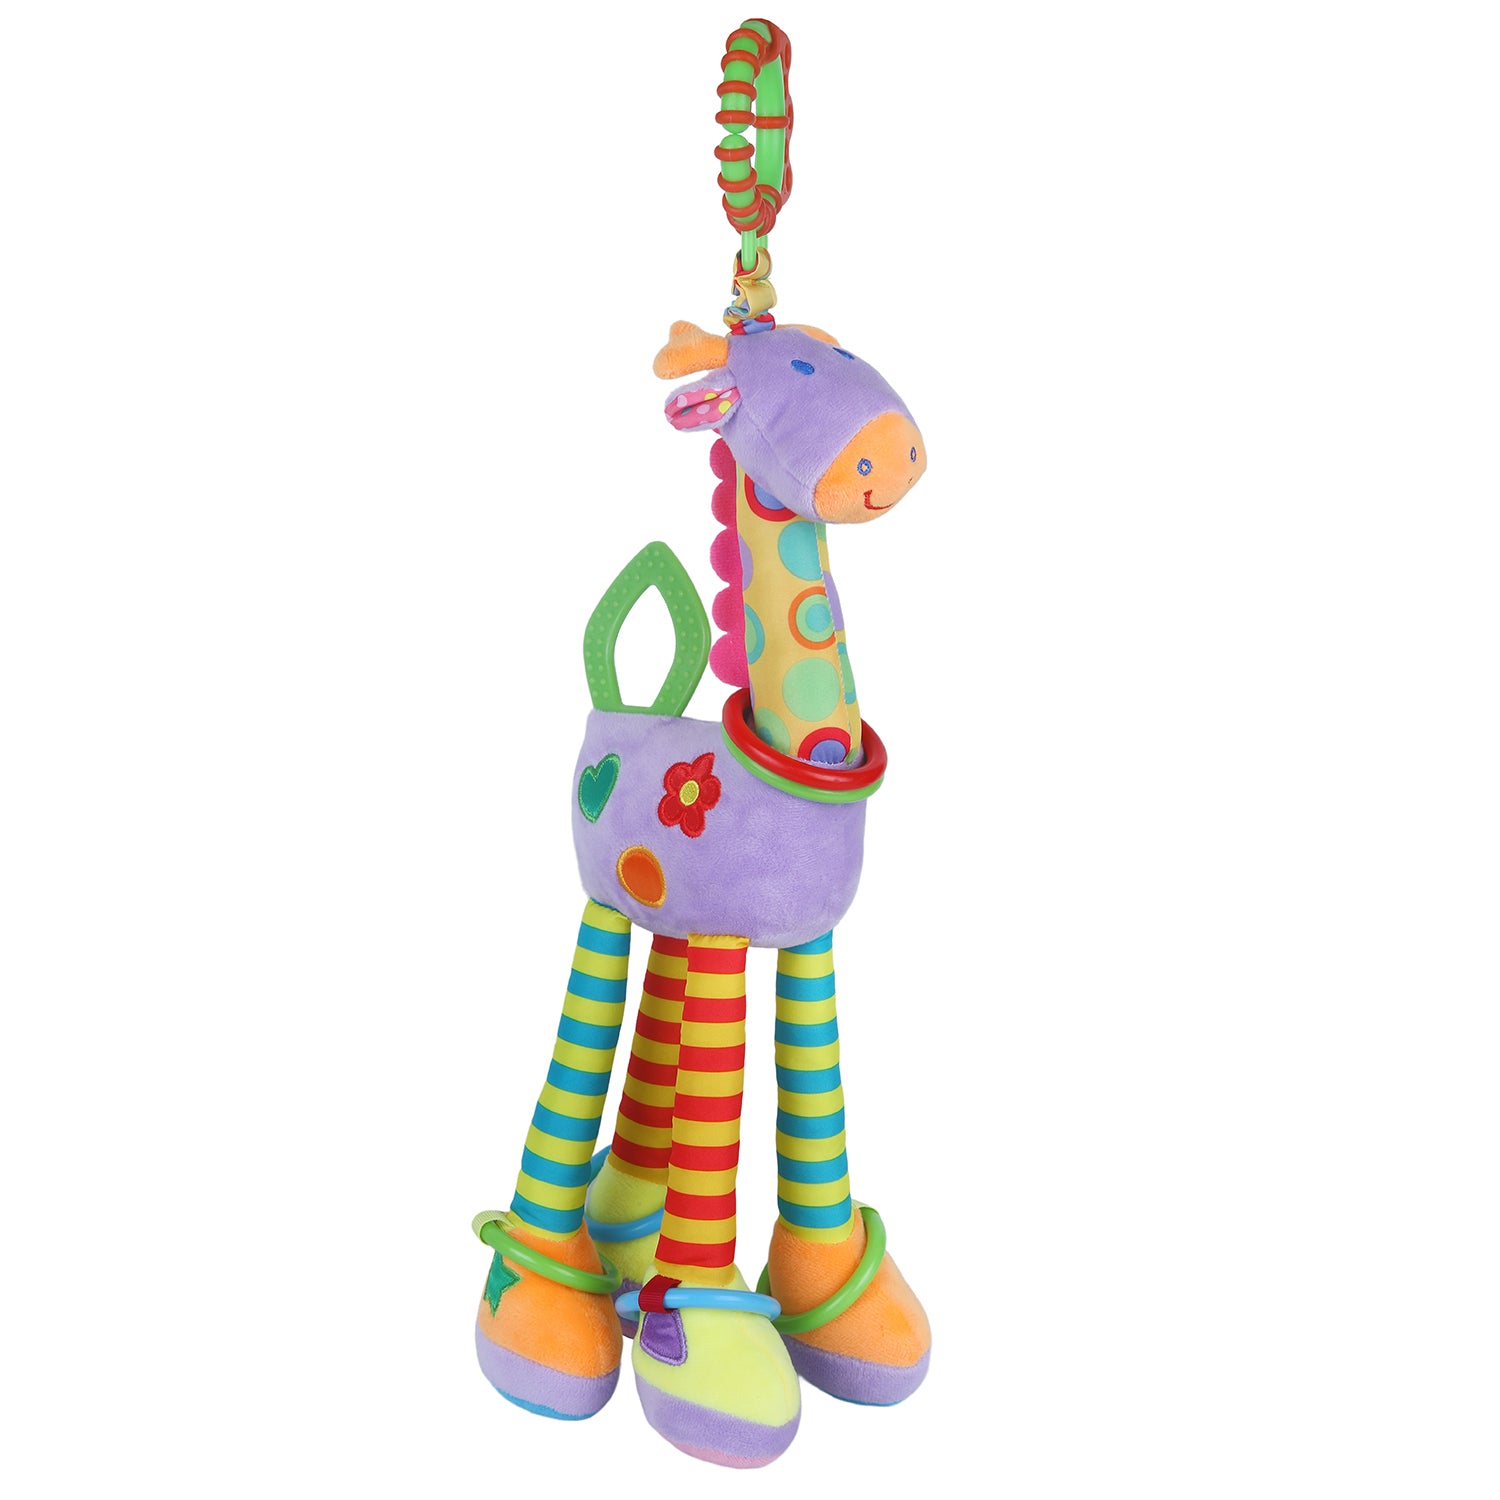 Baby Moo Flexible Giraffe Musical Hanging Toy With Teether Hanging Toy - Multicolour